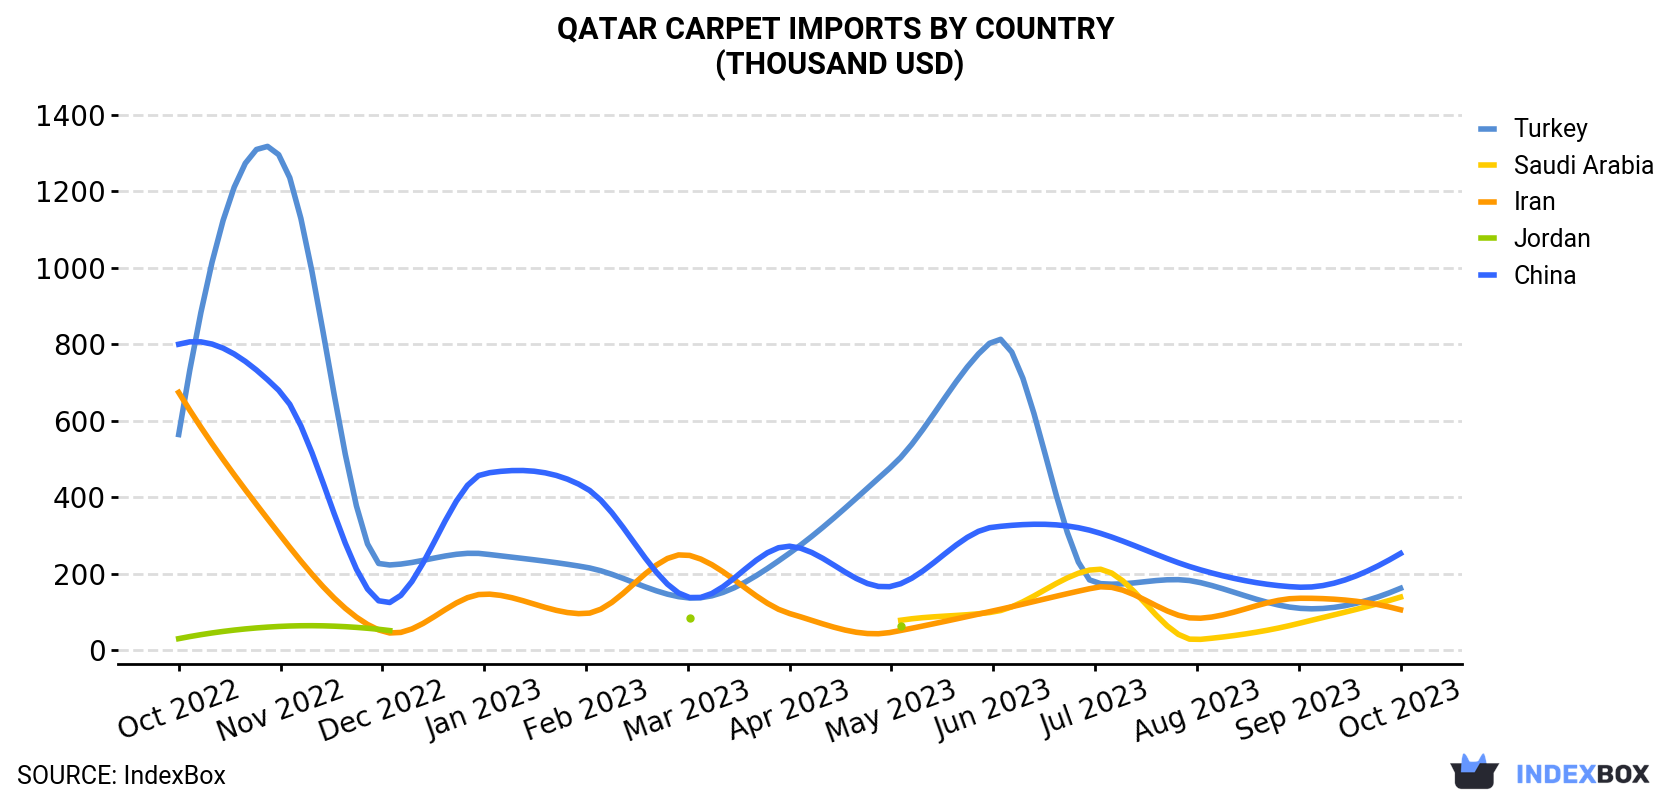 Qatar Carpet Imports By Country (Thousand USD)